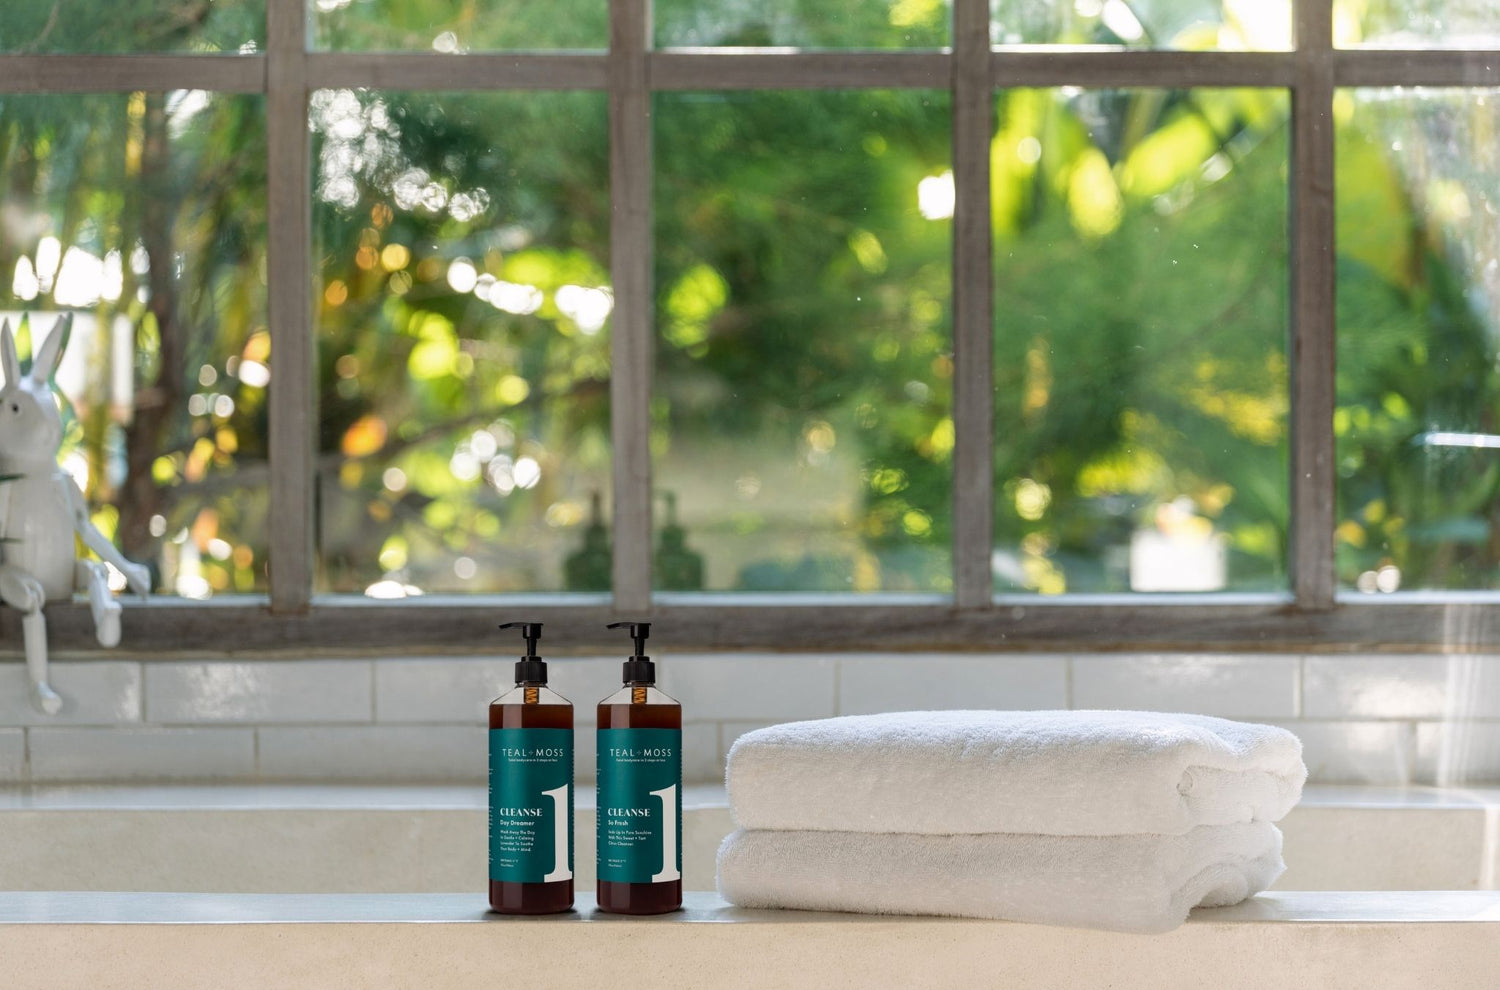 32oz bottles of liquid soap made by Teal and Moss  on a tub near a window with towels